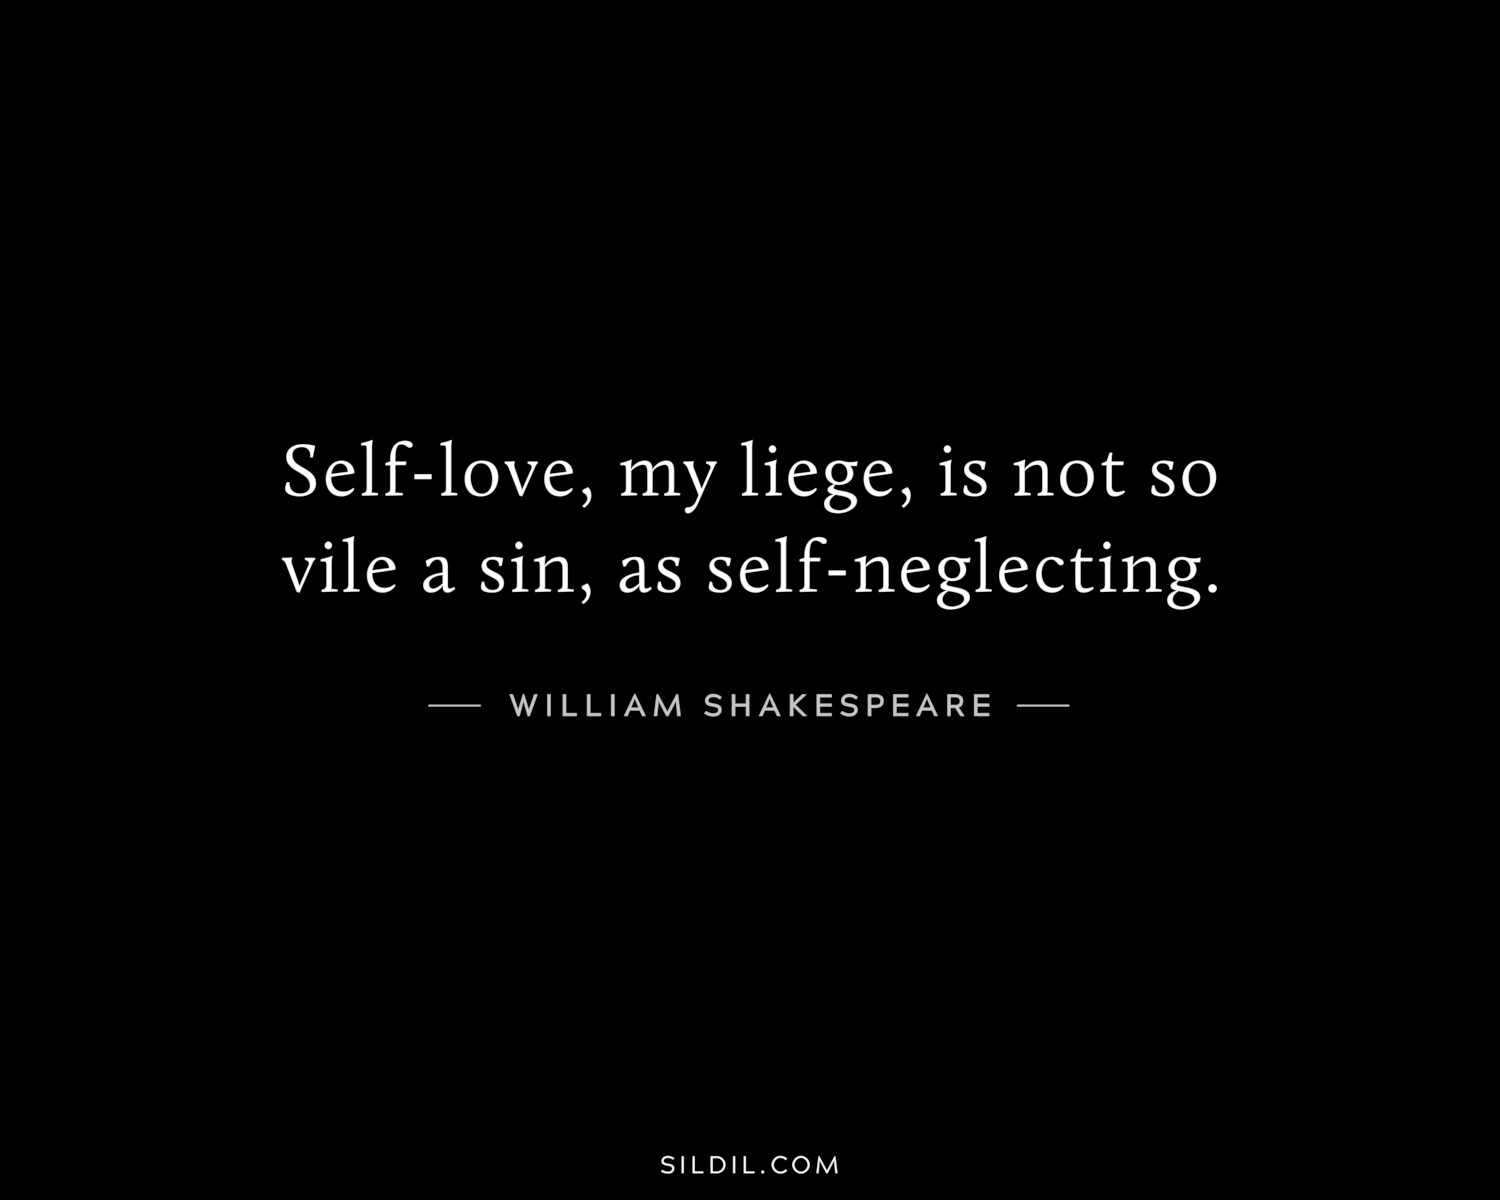 Self-love, my liege, is not so vile a sin, as self-neglecting.